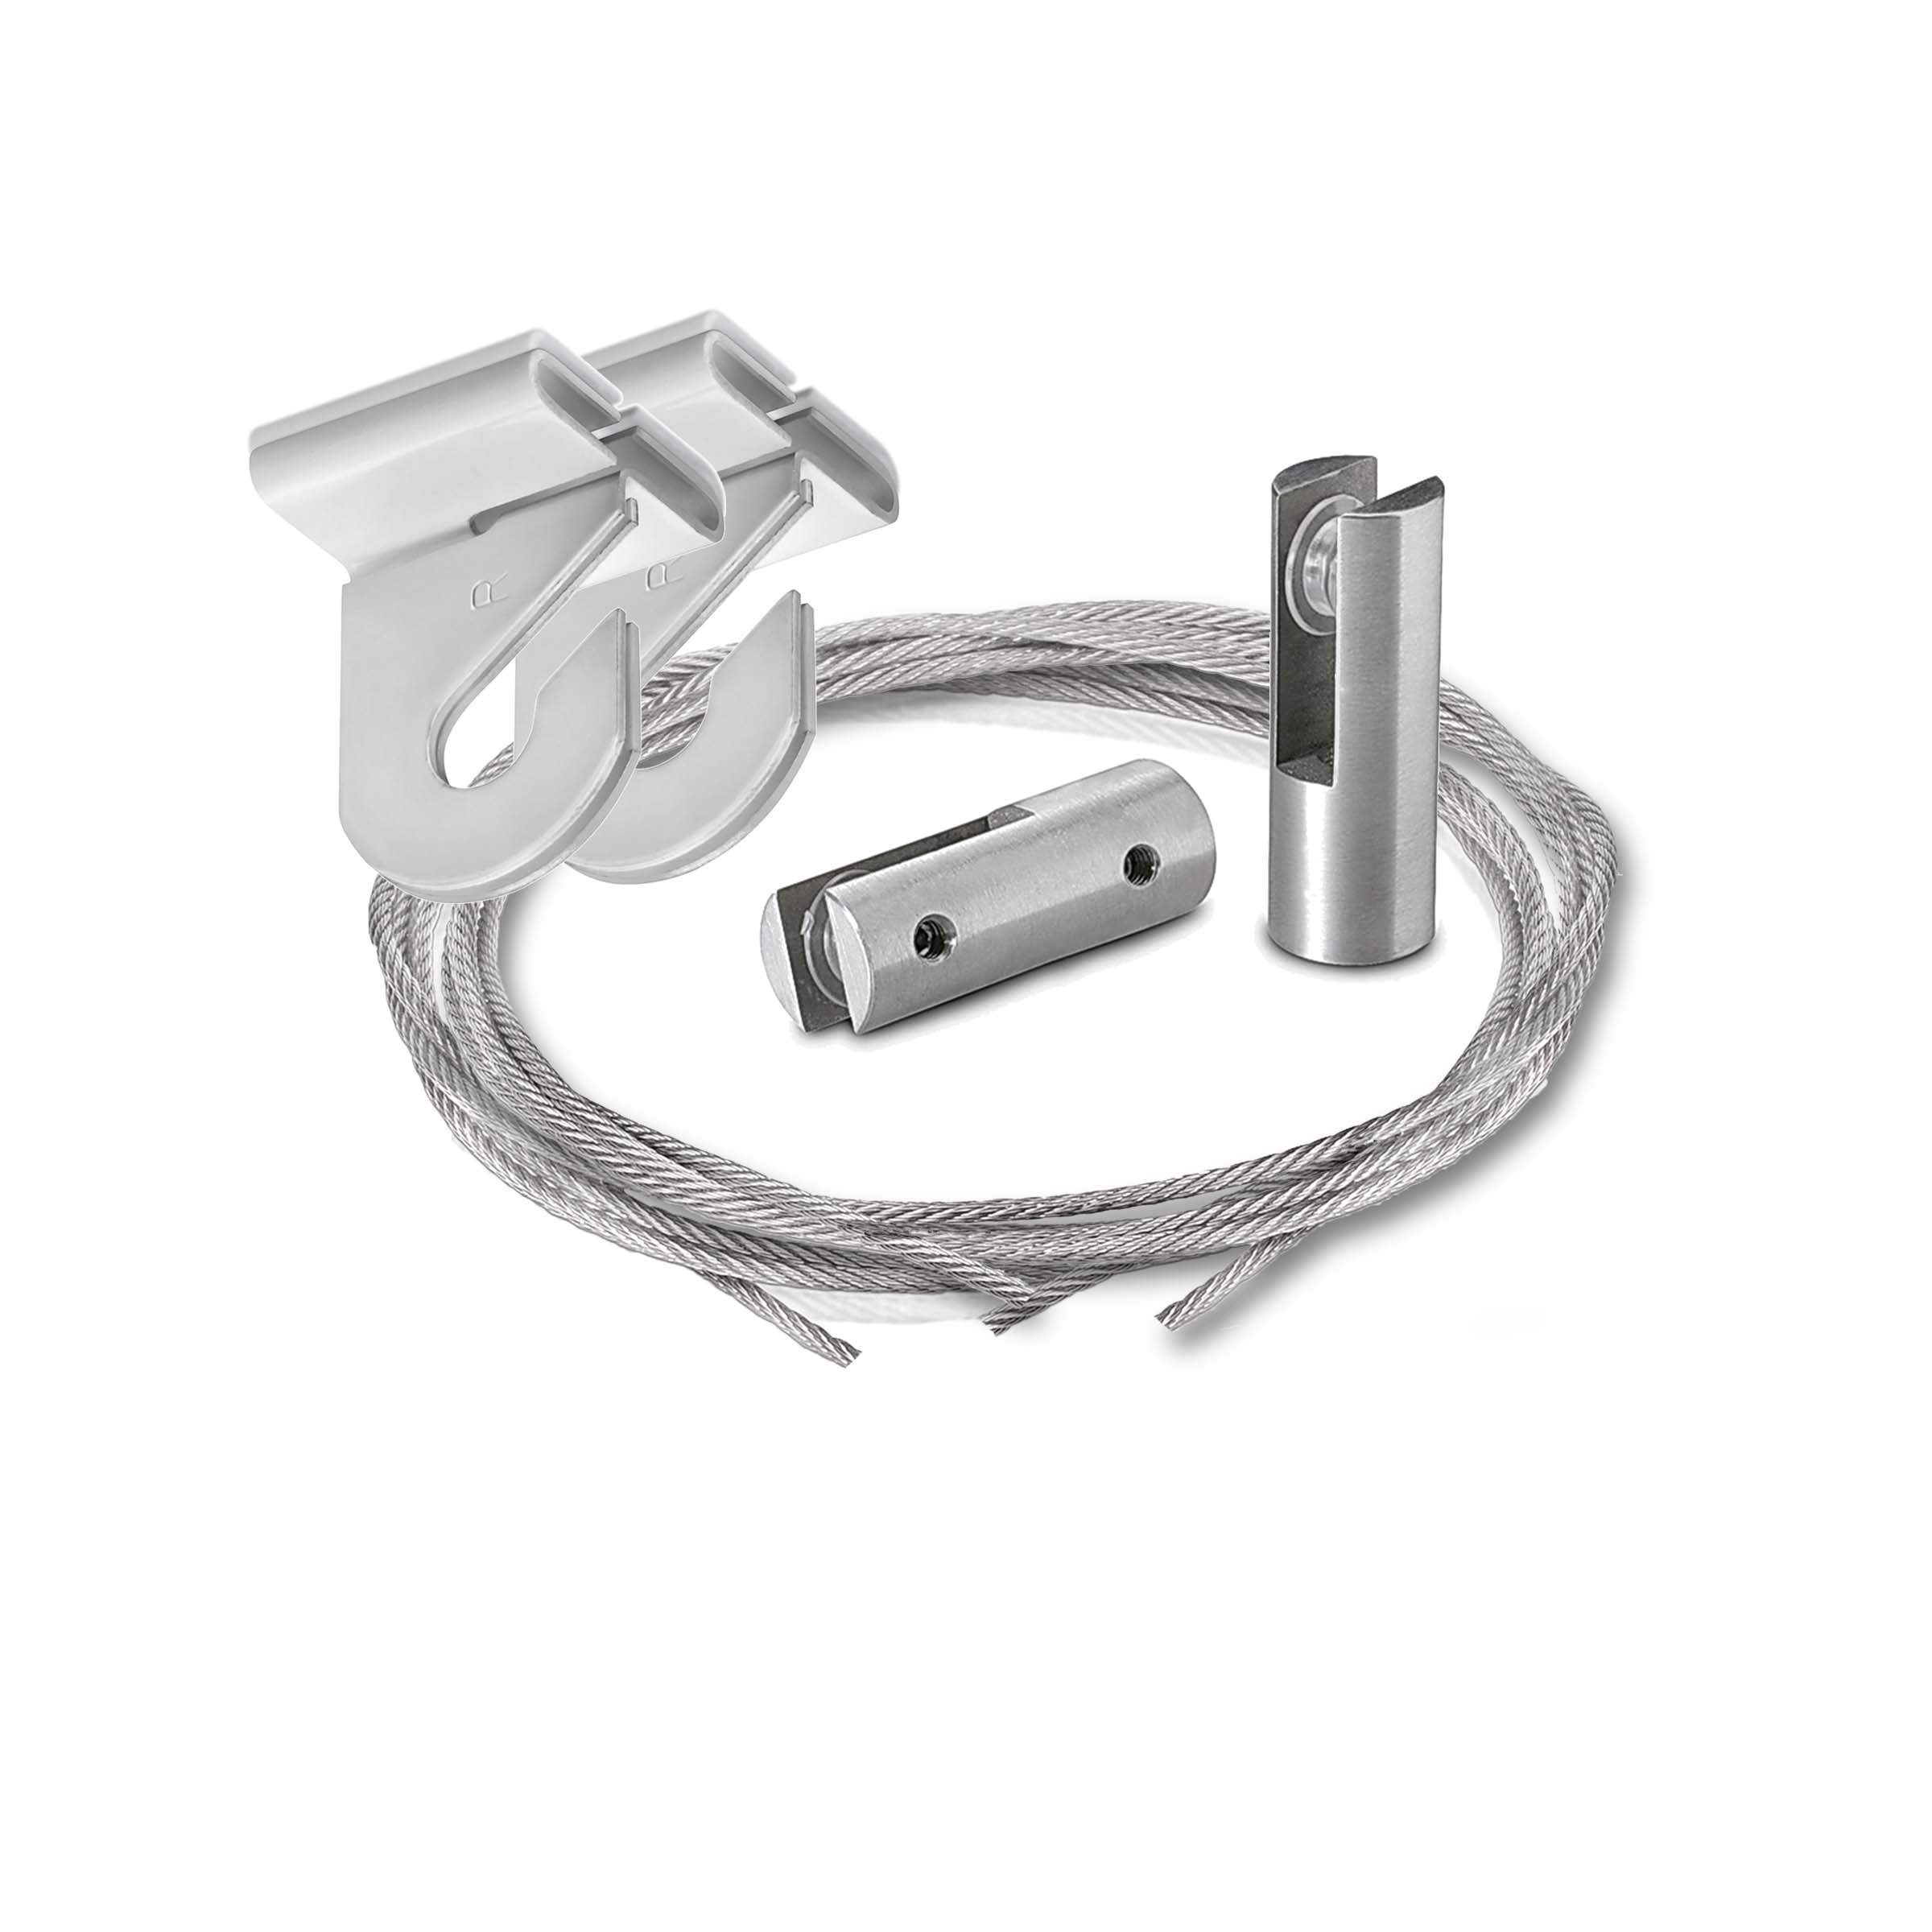 2 Pieces of 120'' Stainless Steel Satin Brushed Suspended Cable Kits for 1/4'' Thick Material (2 Full Sets) - 1/16'' Diameter Cable